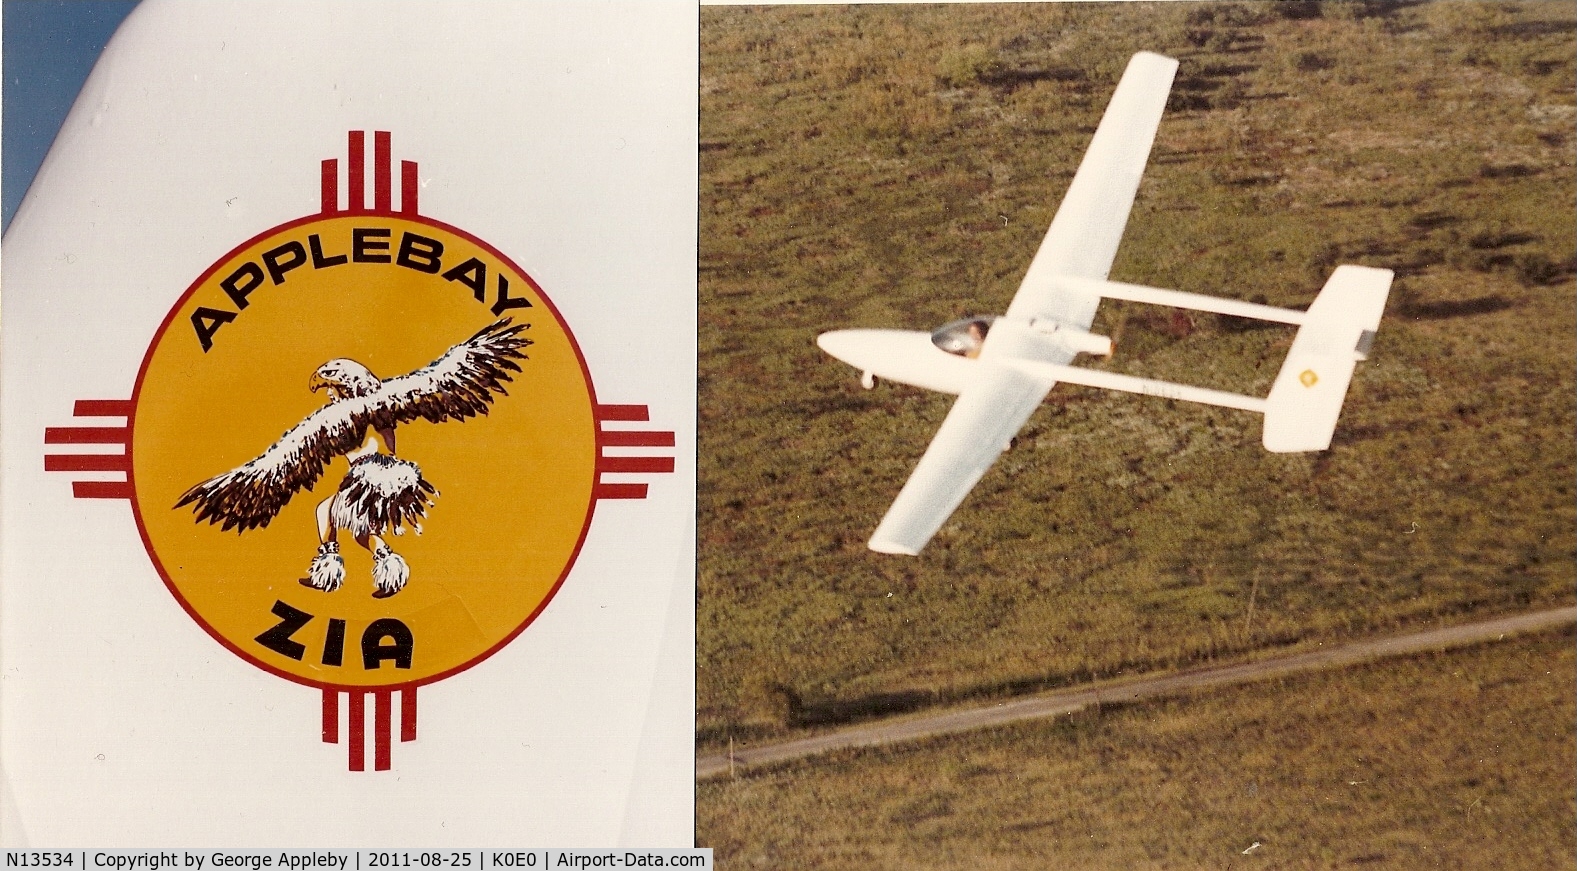 N13534, 1982 Applebay Sailplanes ZIA C/N 1, first test flights by Richard Bullock at Moriarty and Los Lunas NM